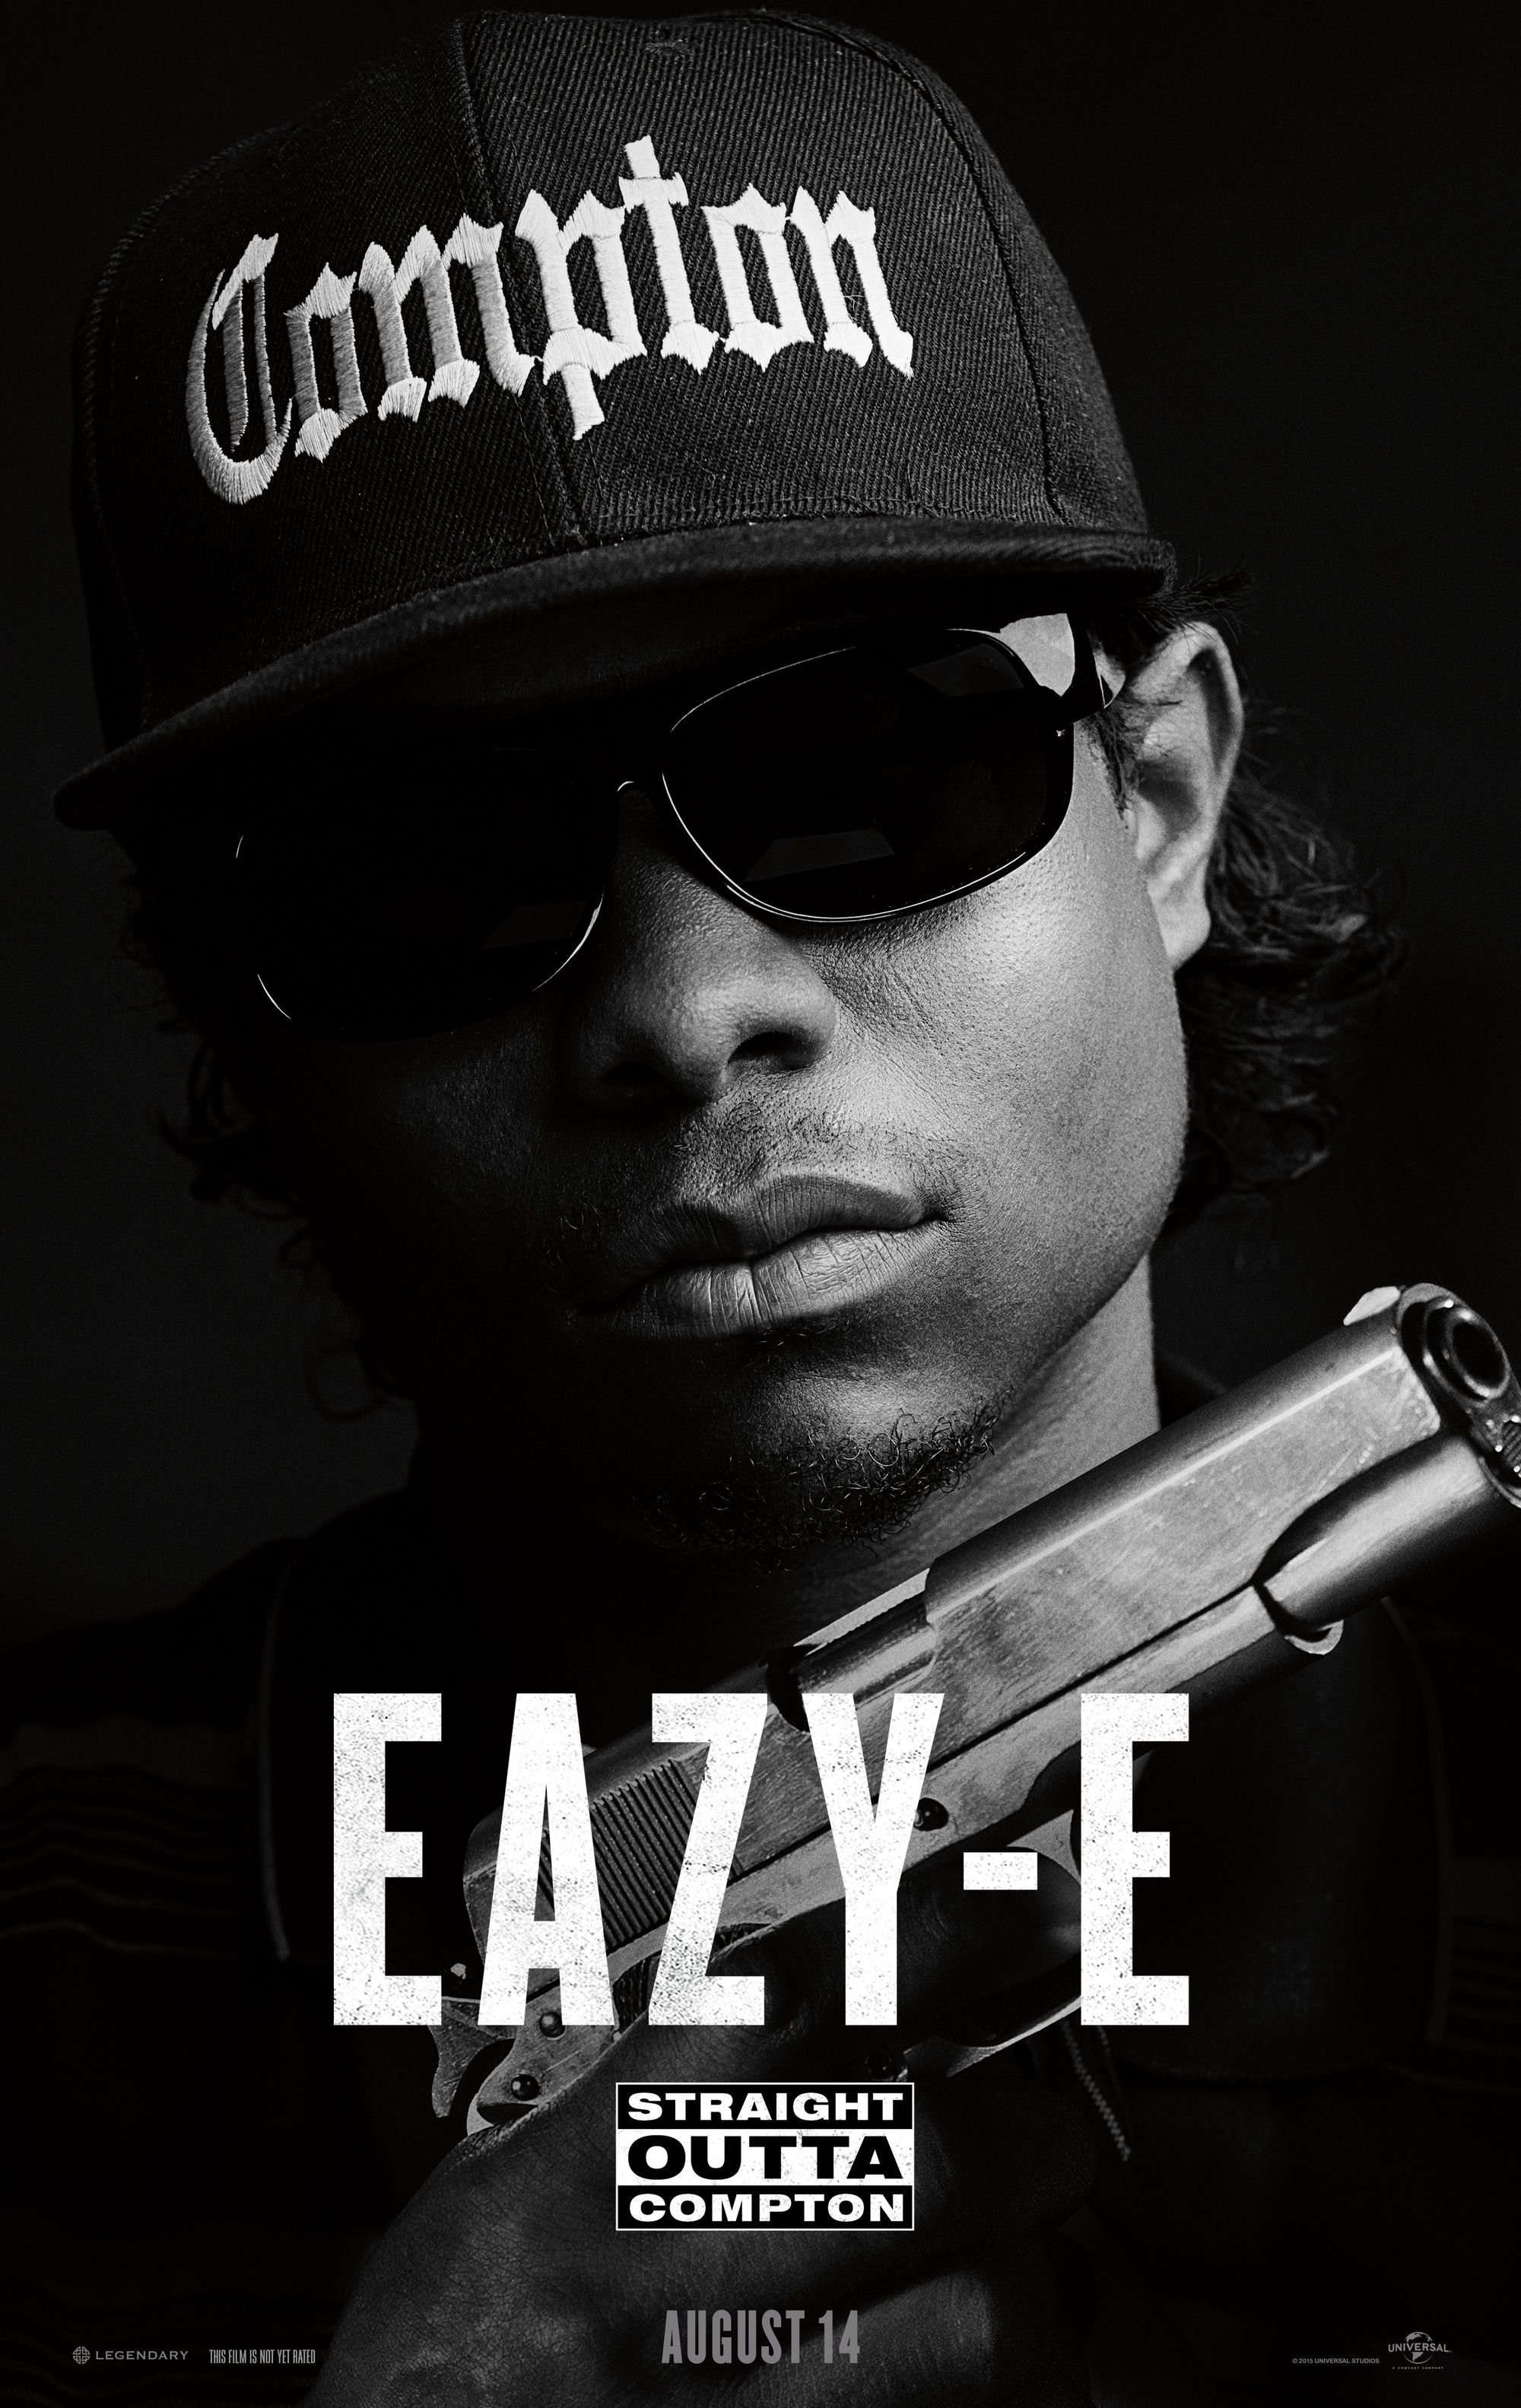 Eazy e art  Awesome Hd Wallpapers  Facebook